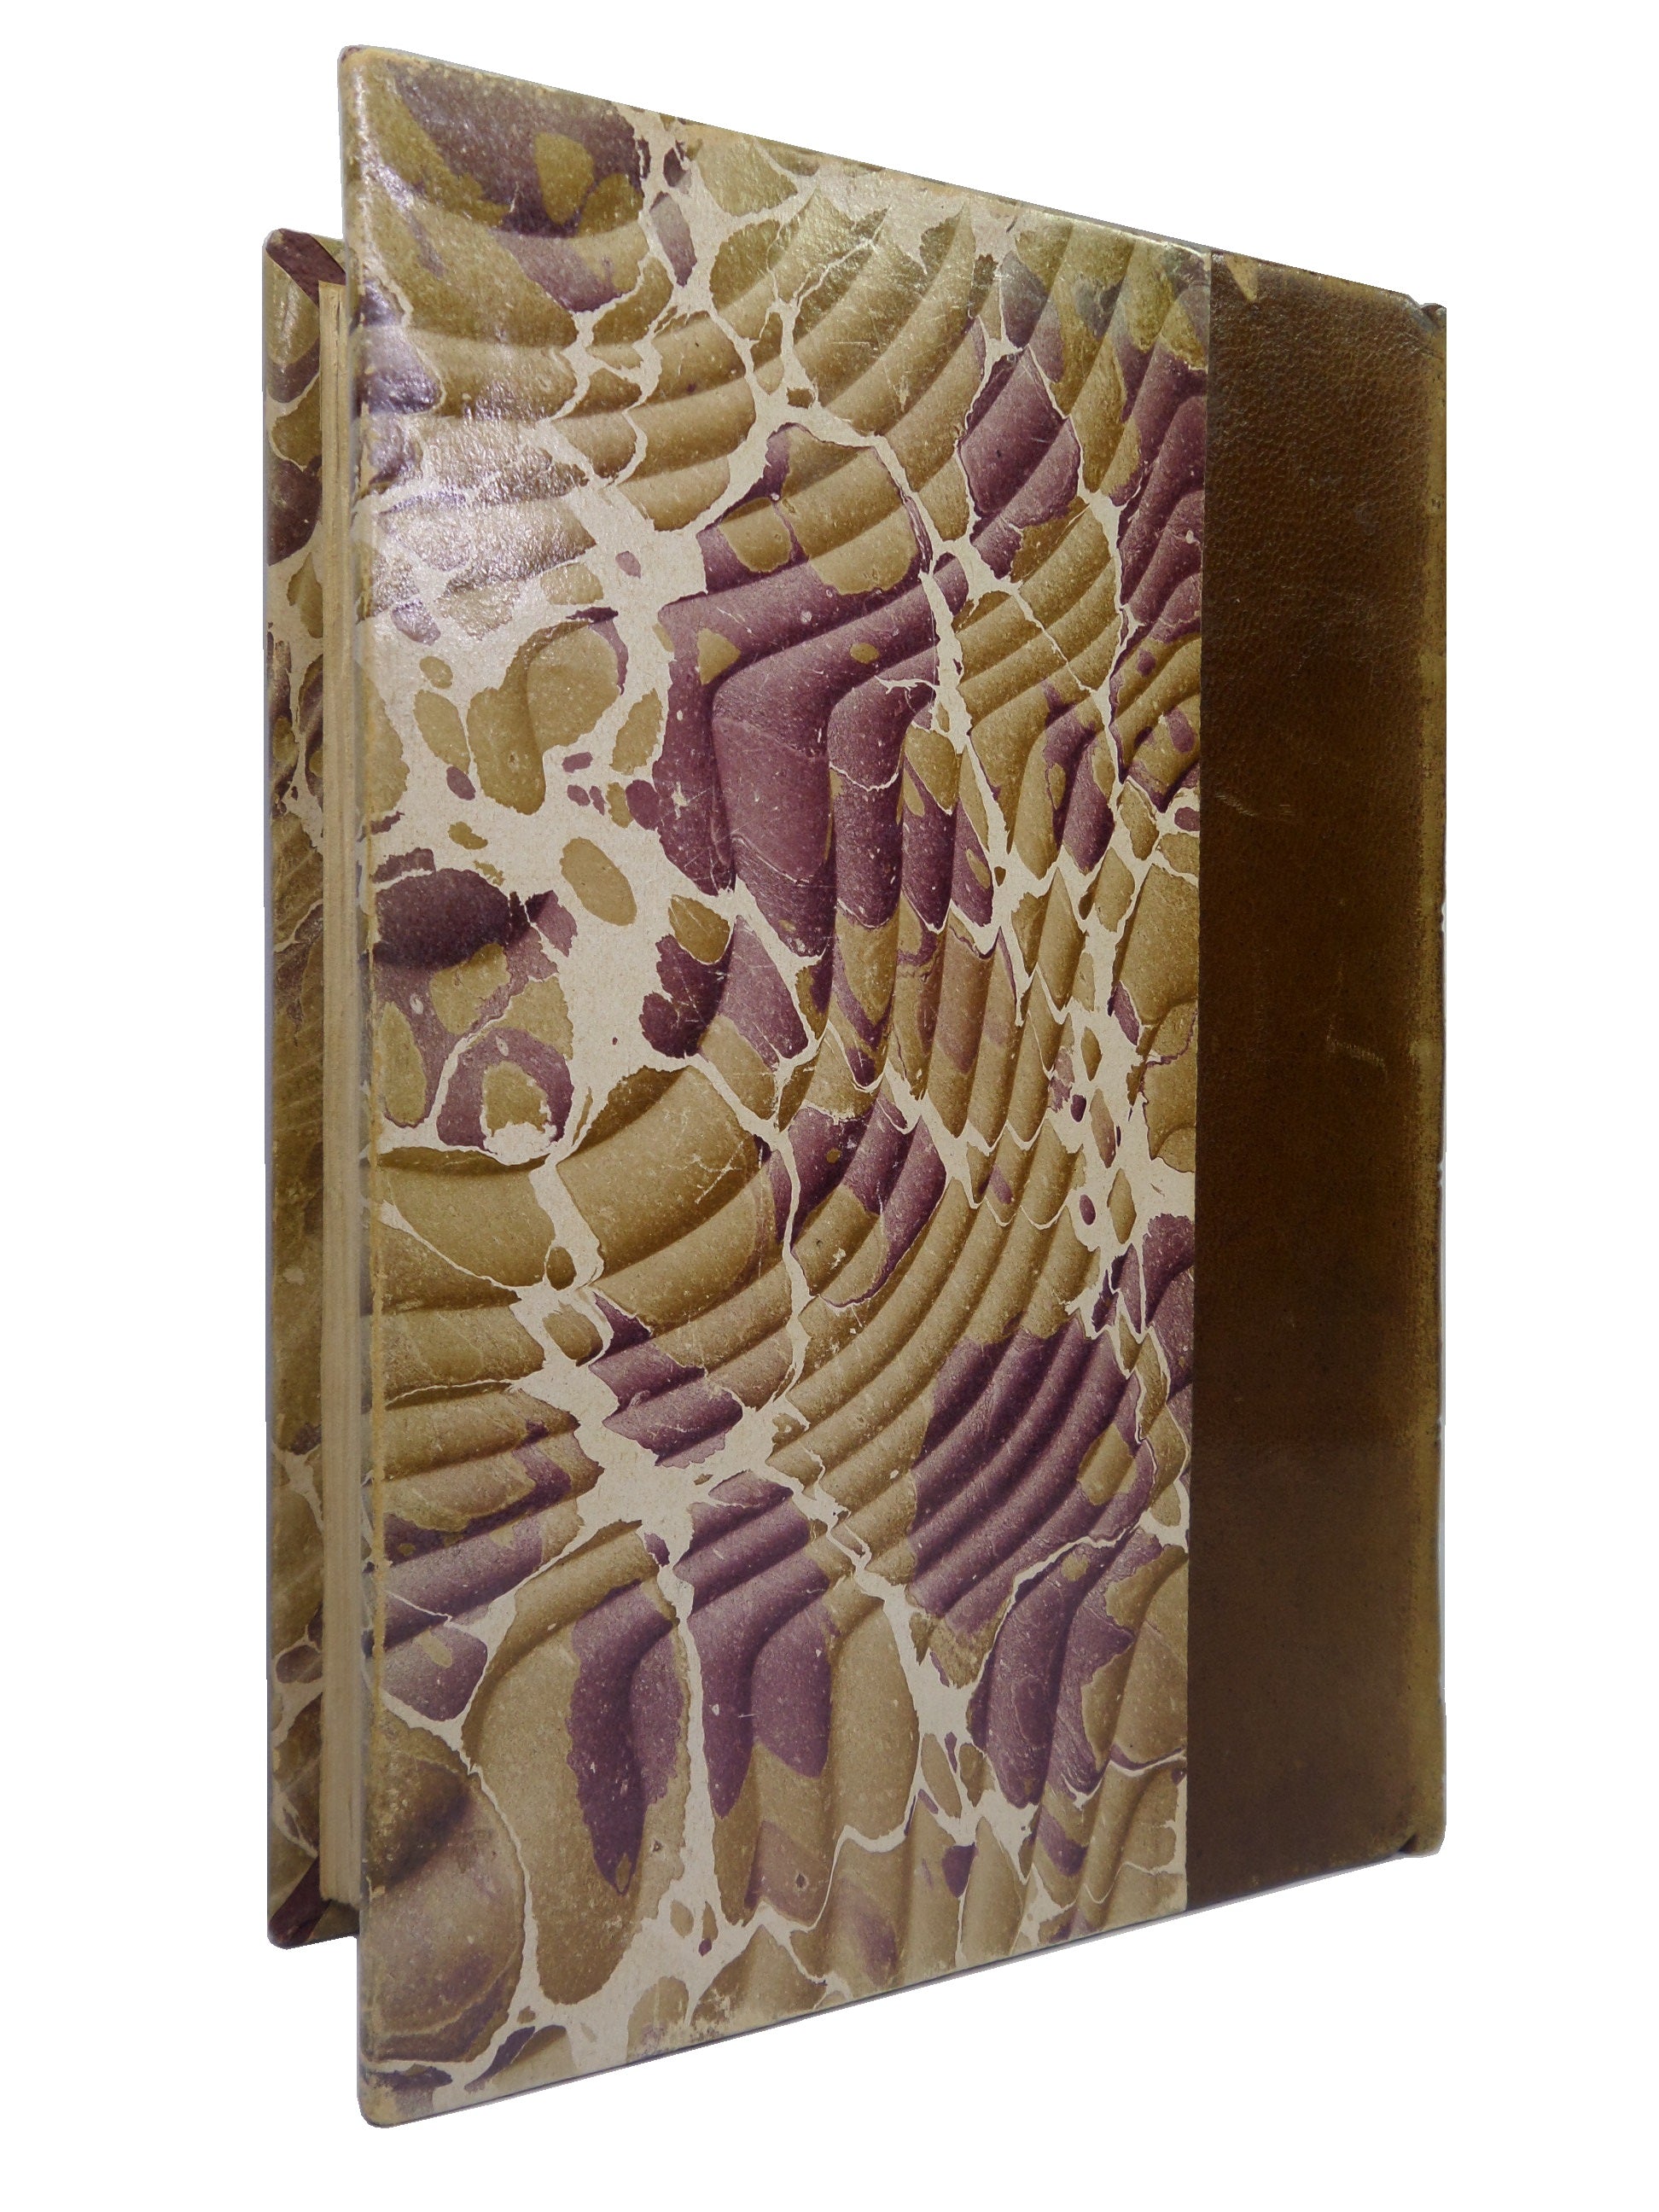 LORD JIM & VICTORY BY JOSEPH CONRAD 1927 LEATHER-BOUND